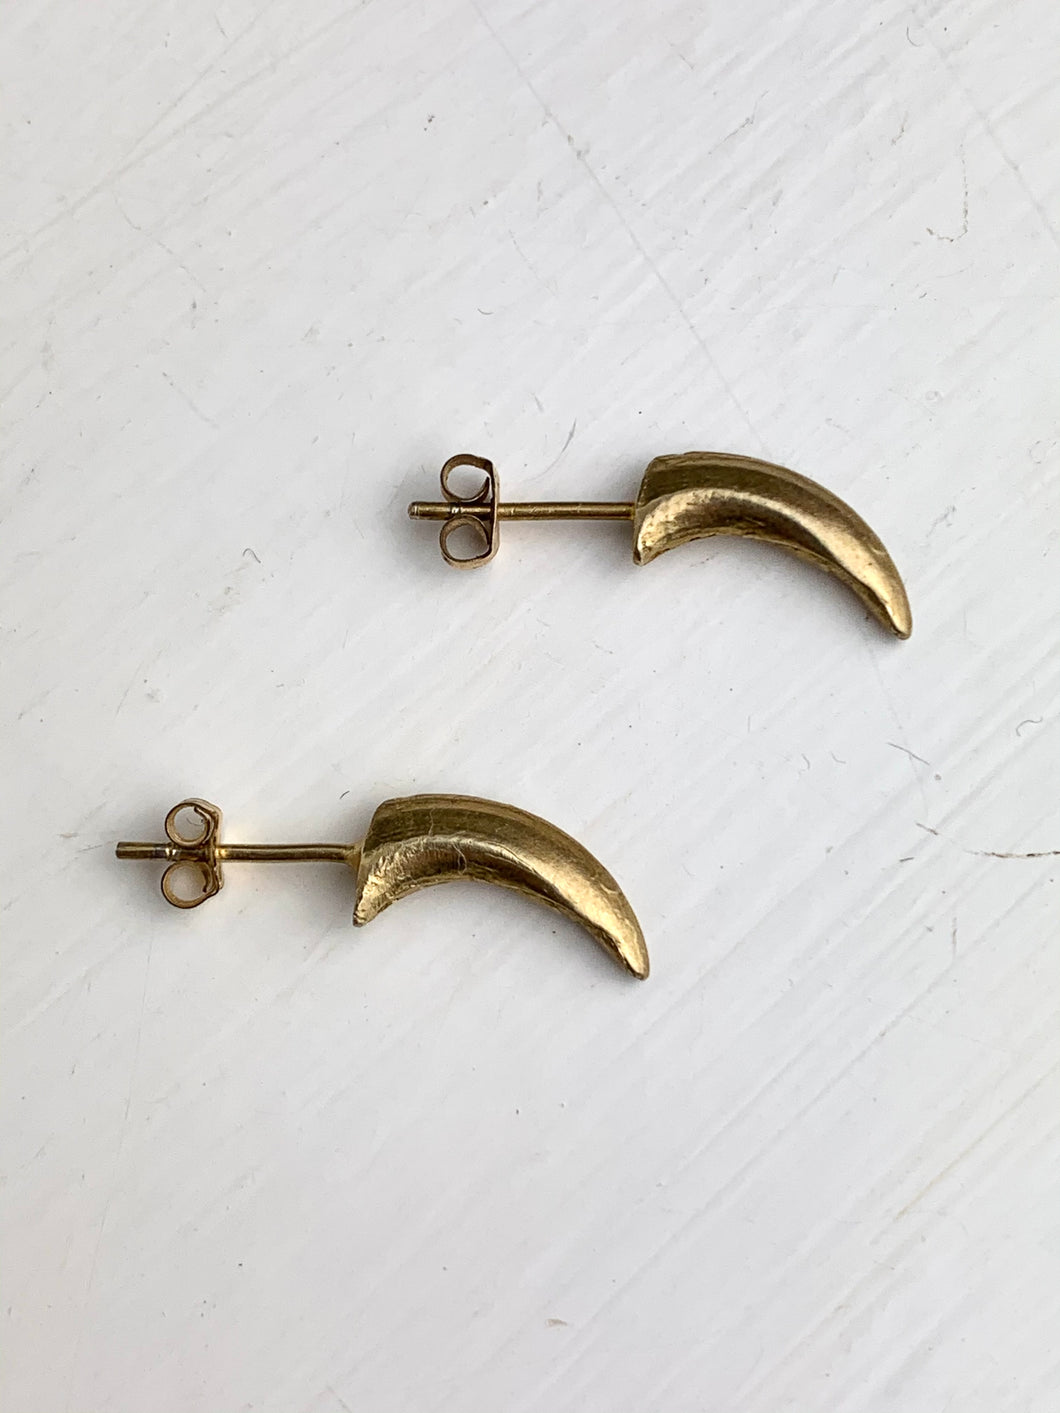 Totem Claw Studs Earrings in Gold